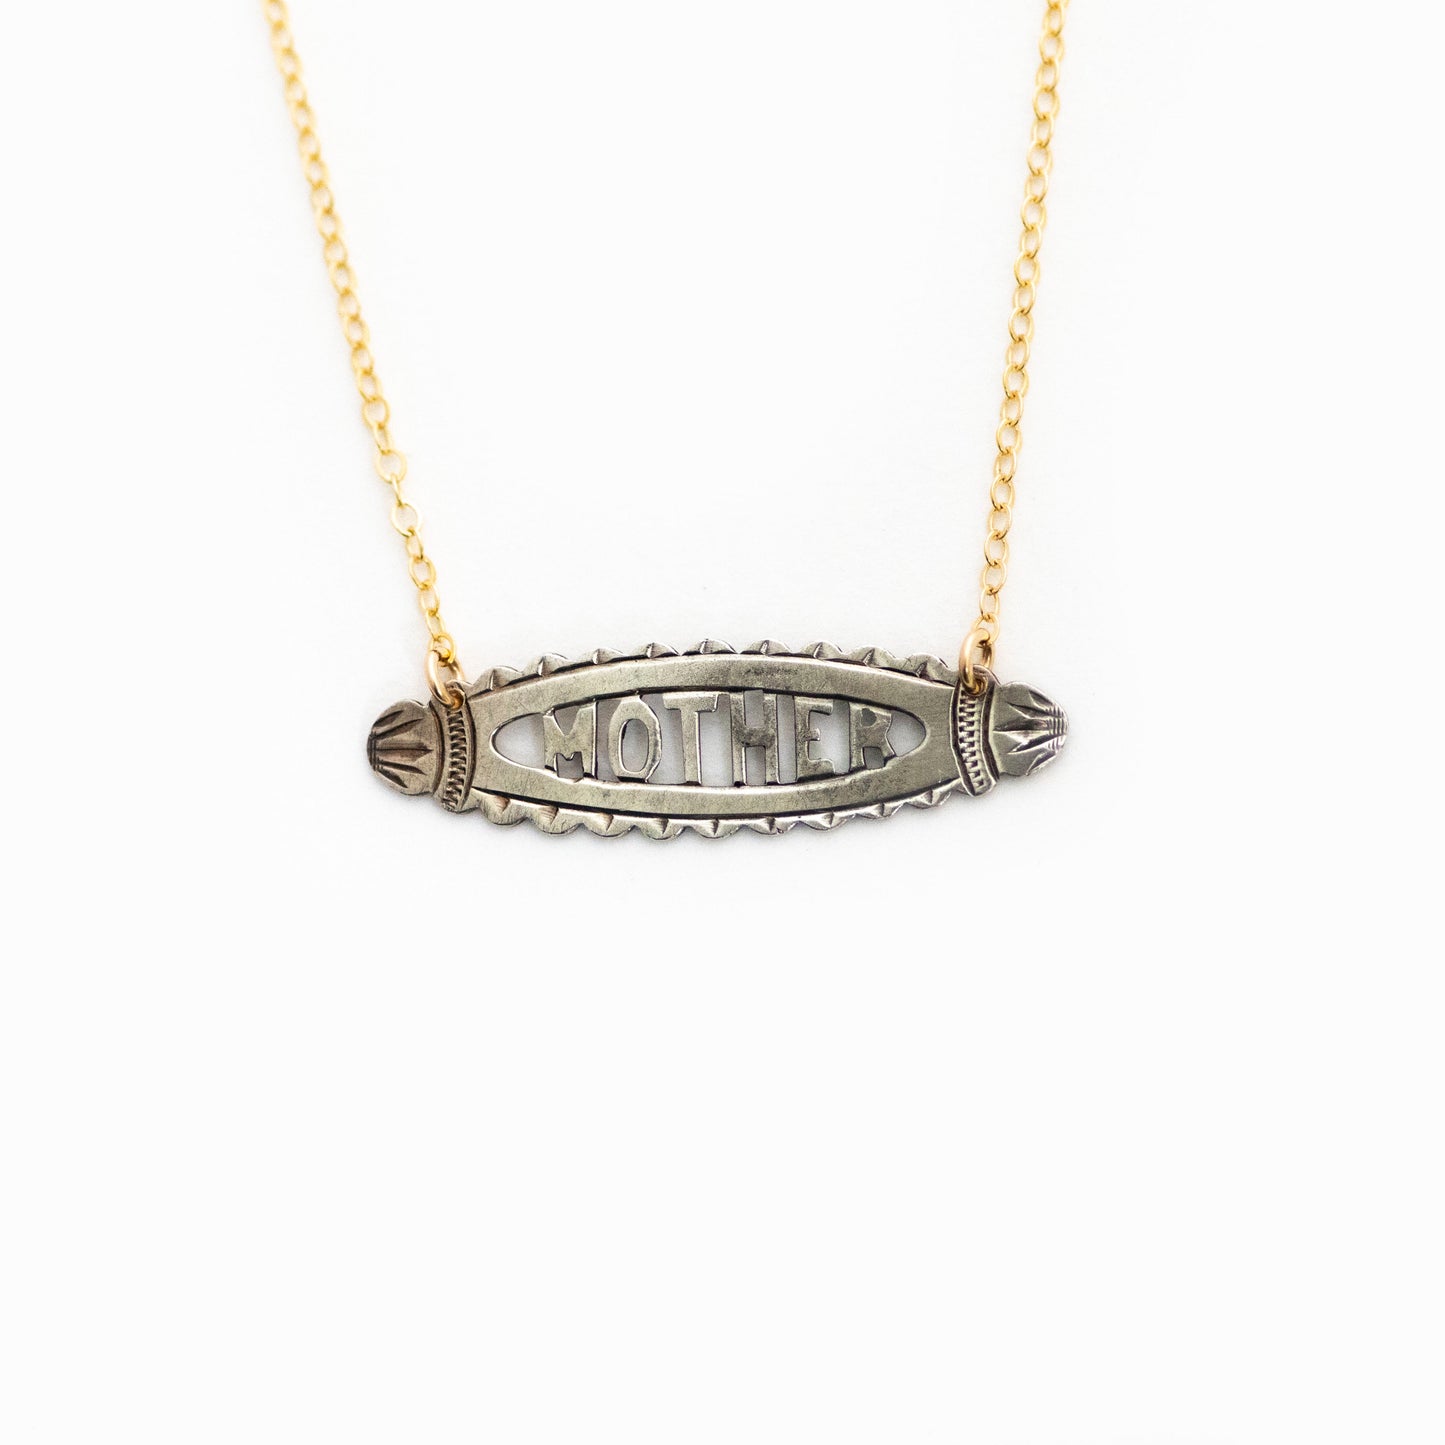 This antique conversion necklace is made up of:  Sterling silver Victorian bar pin pendant from the late 1800s with hand fabricated details depicting the word "MOTHER". Hanging straight down from a 14k gold filled cable chain.